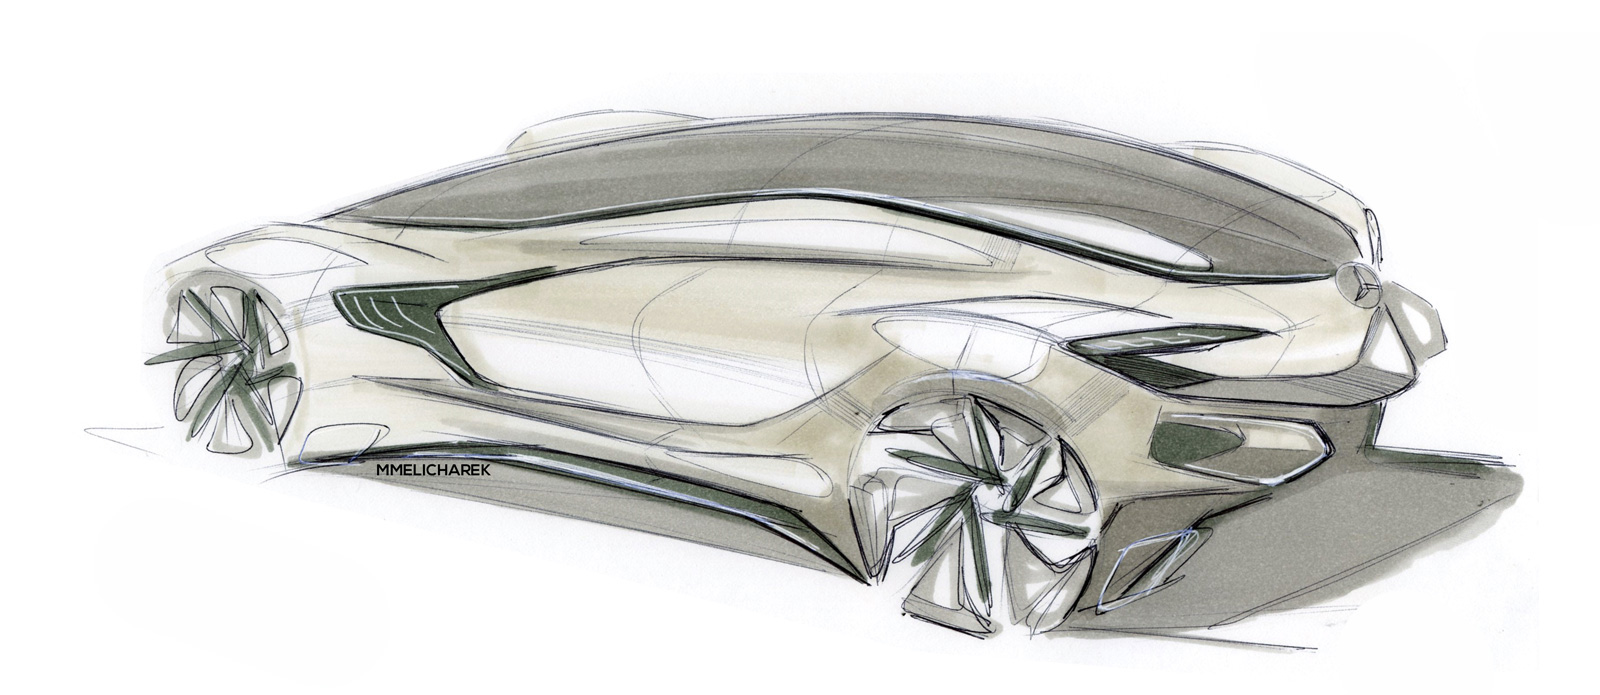 Car design sketches and doodles